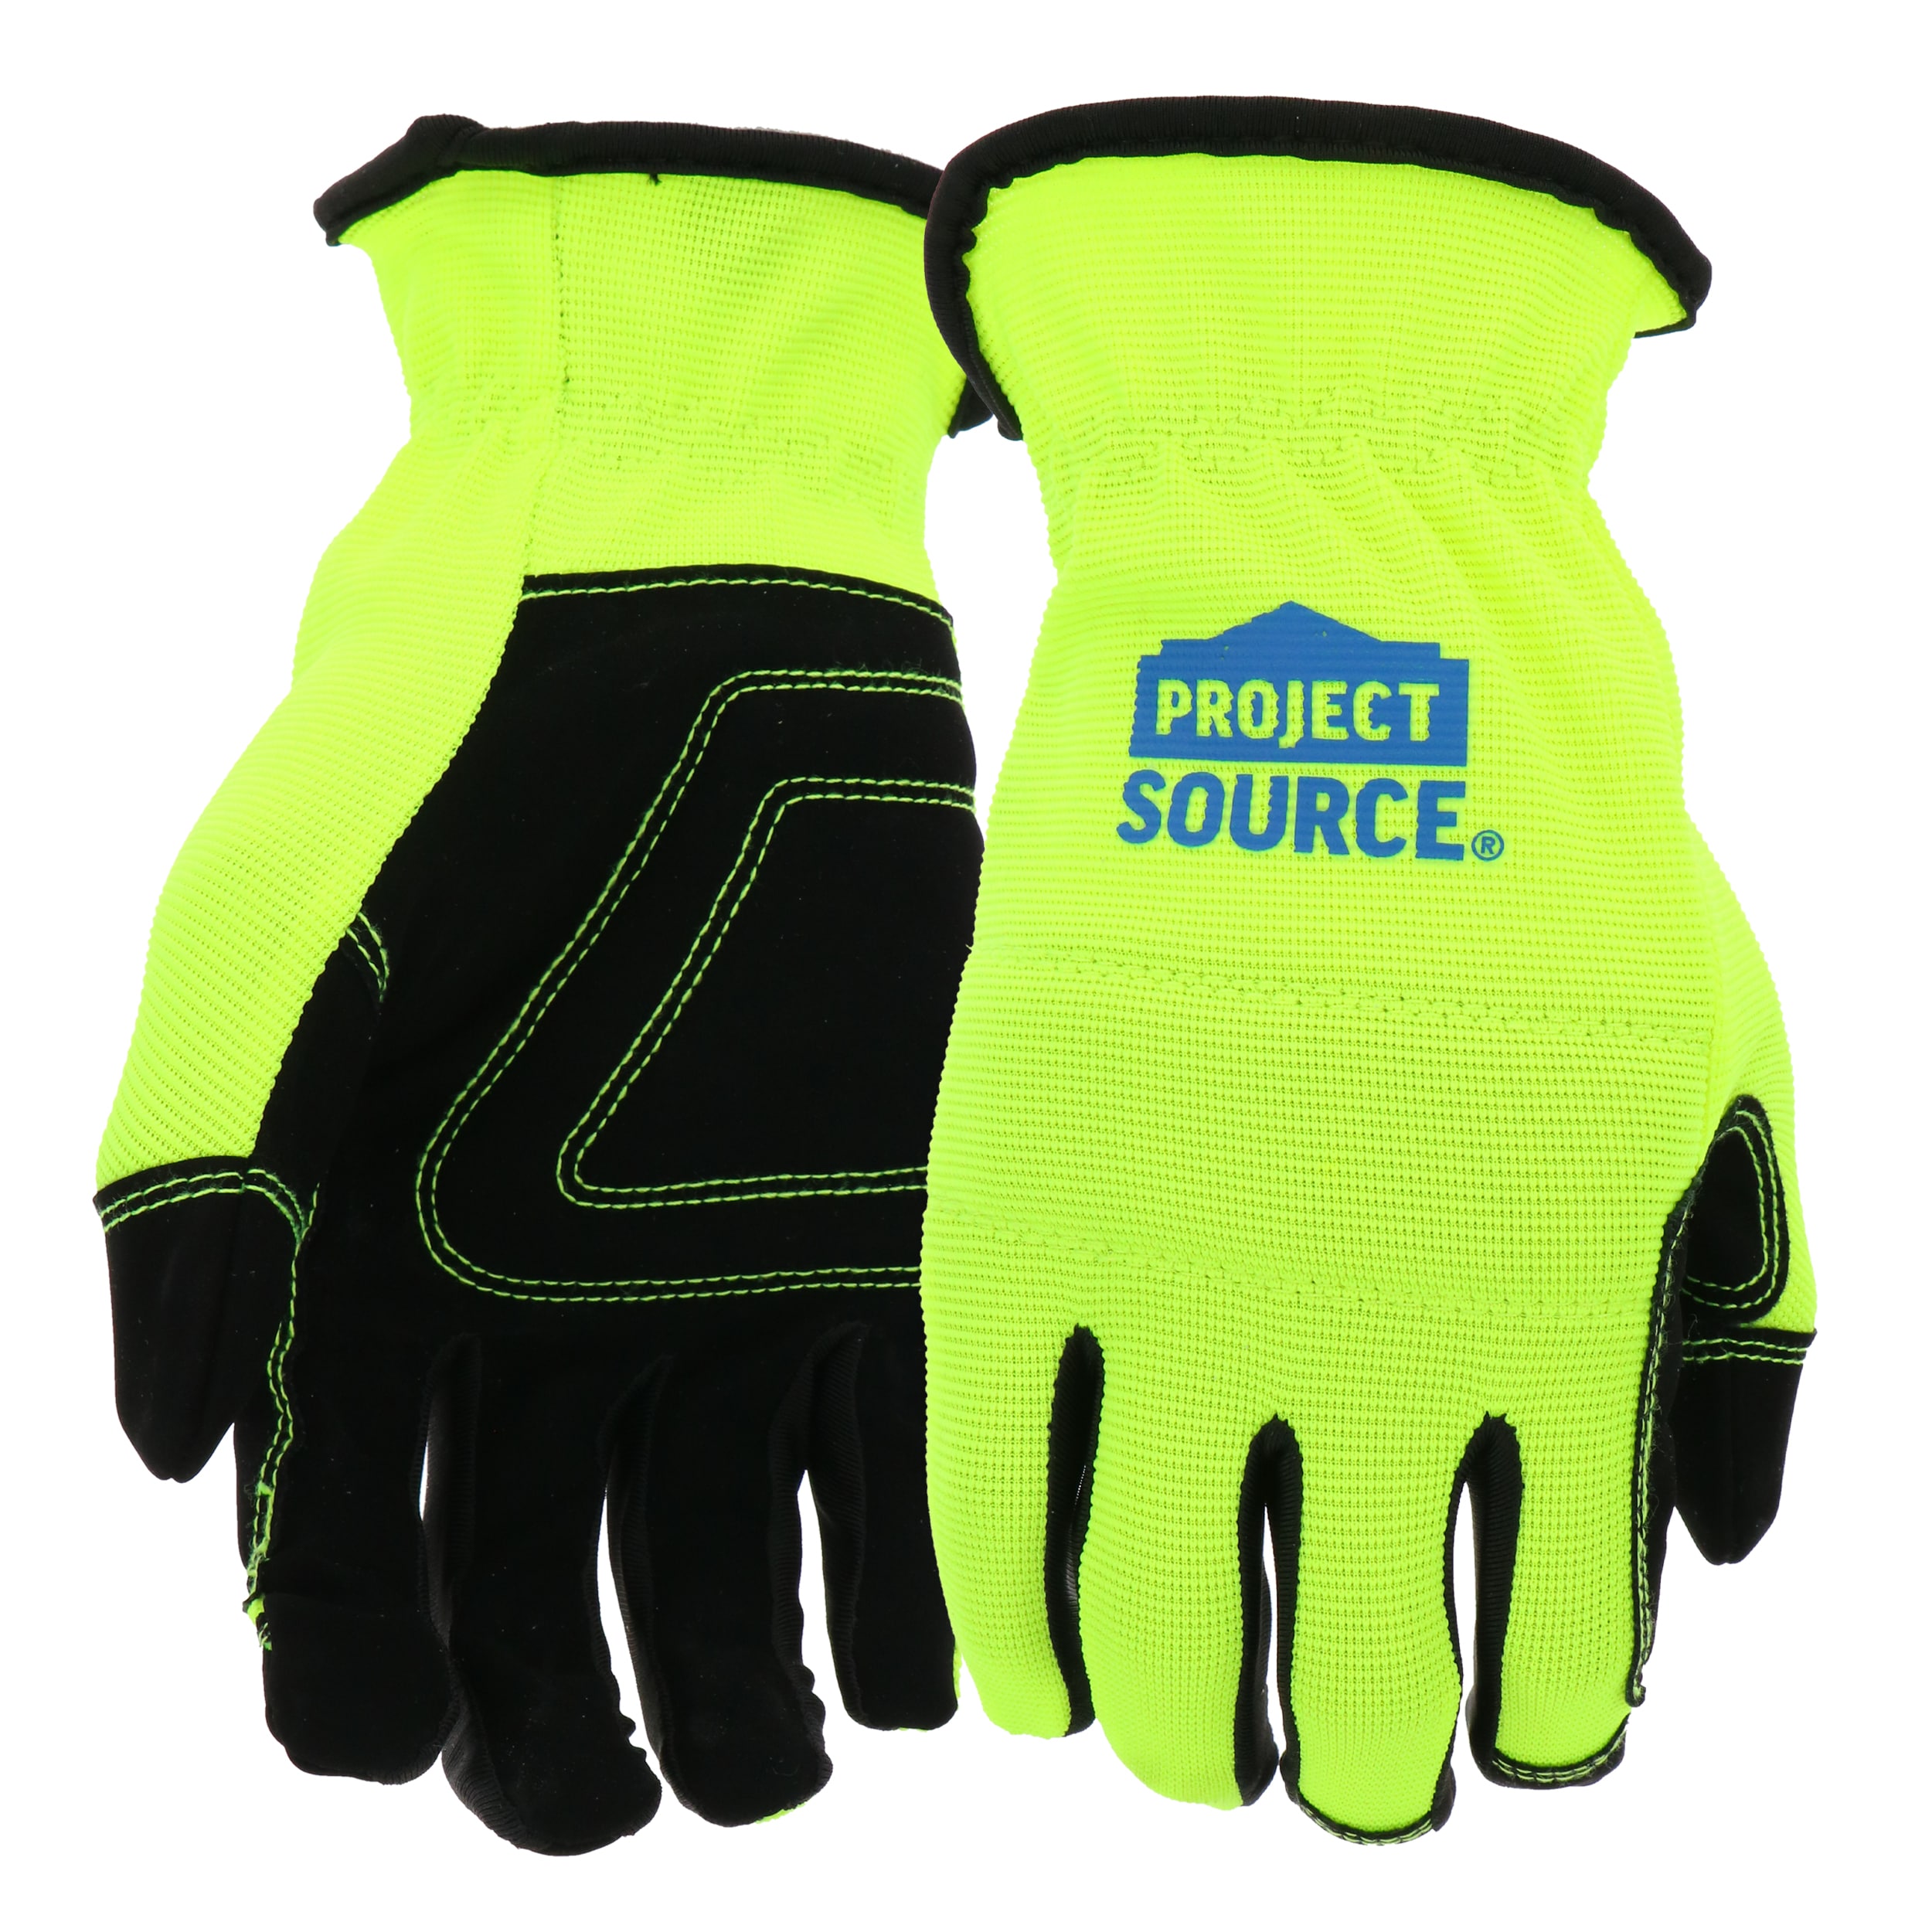 Industrial Work Gloves - Safety Workwear Selection